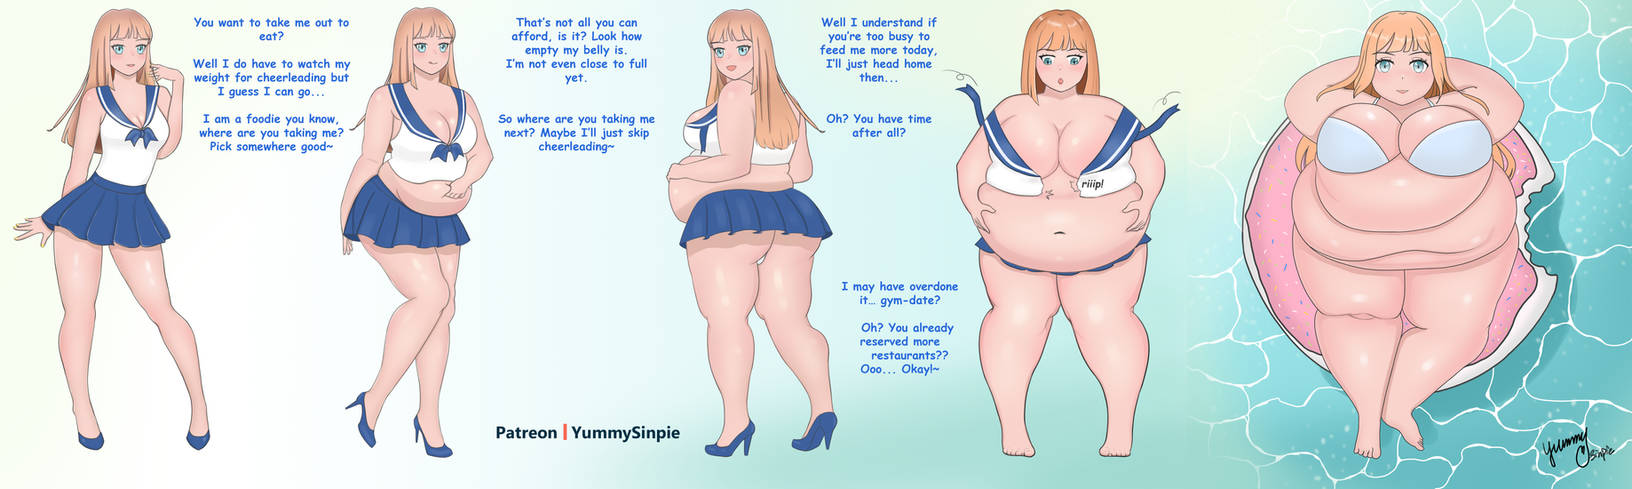 Chubby-chan Weight Drive Combined by YummySinpie on DeviantArt.